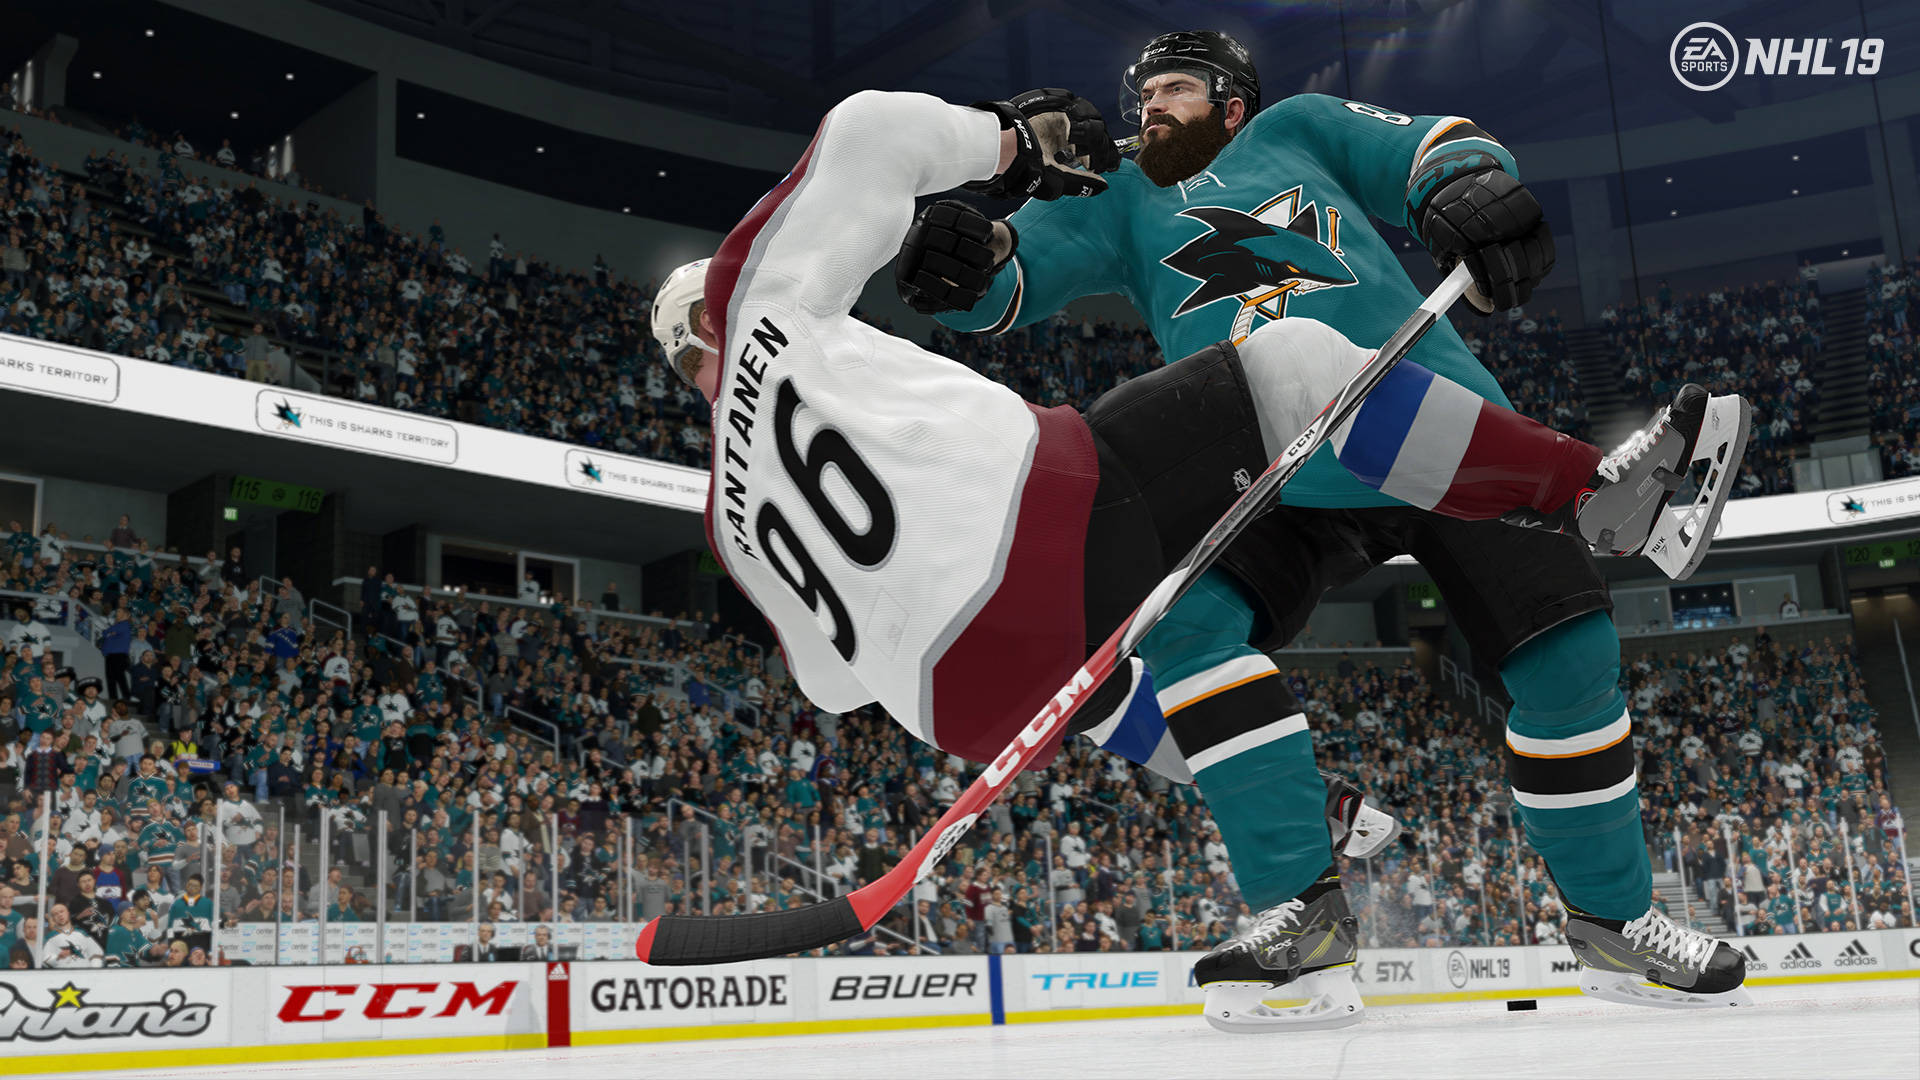 Nhl 19 Ice Hockey Official Video Game Background